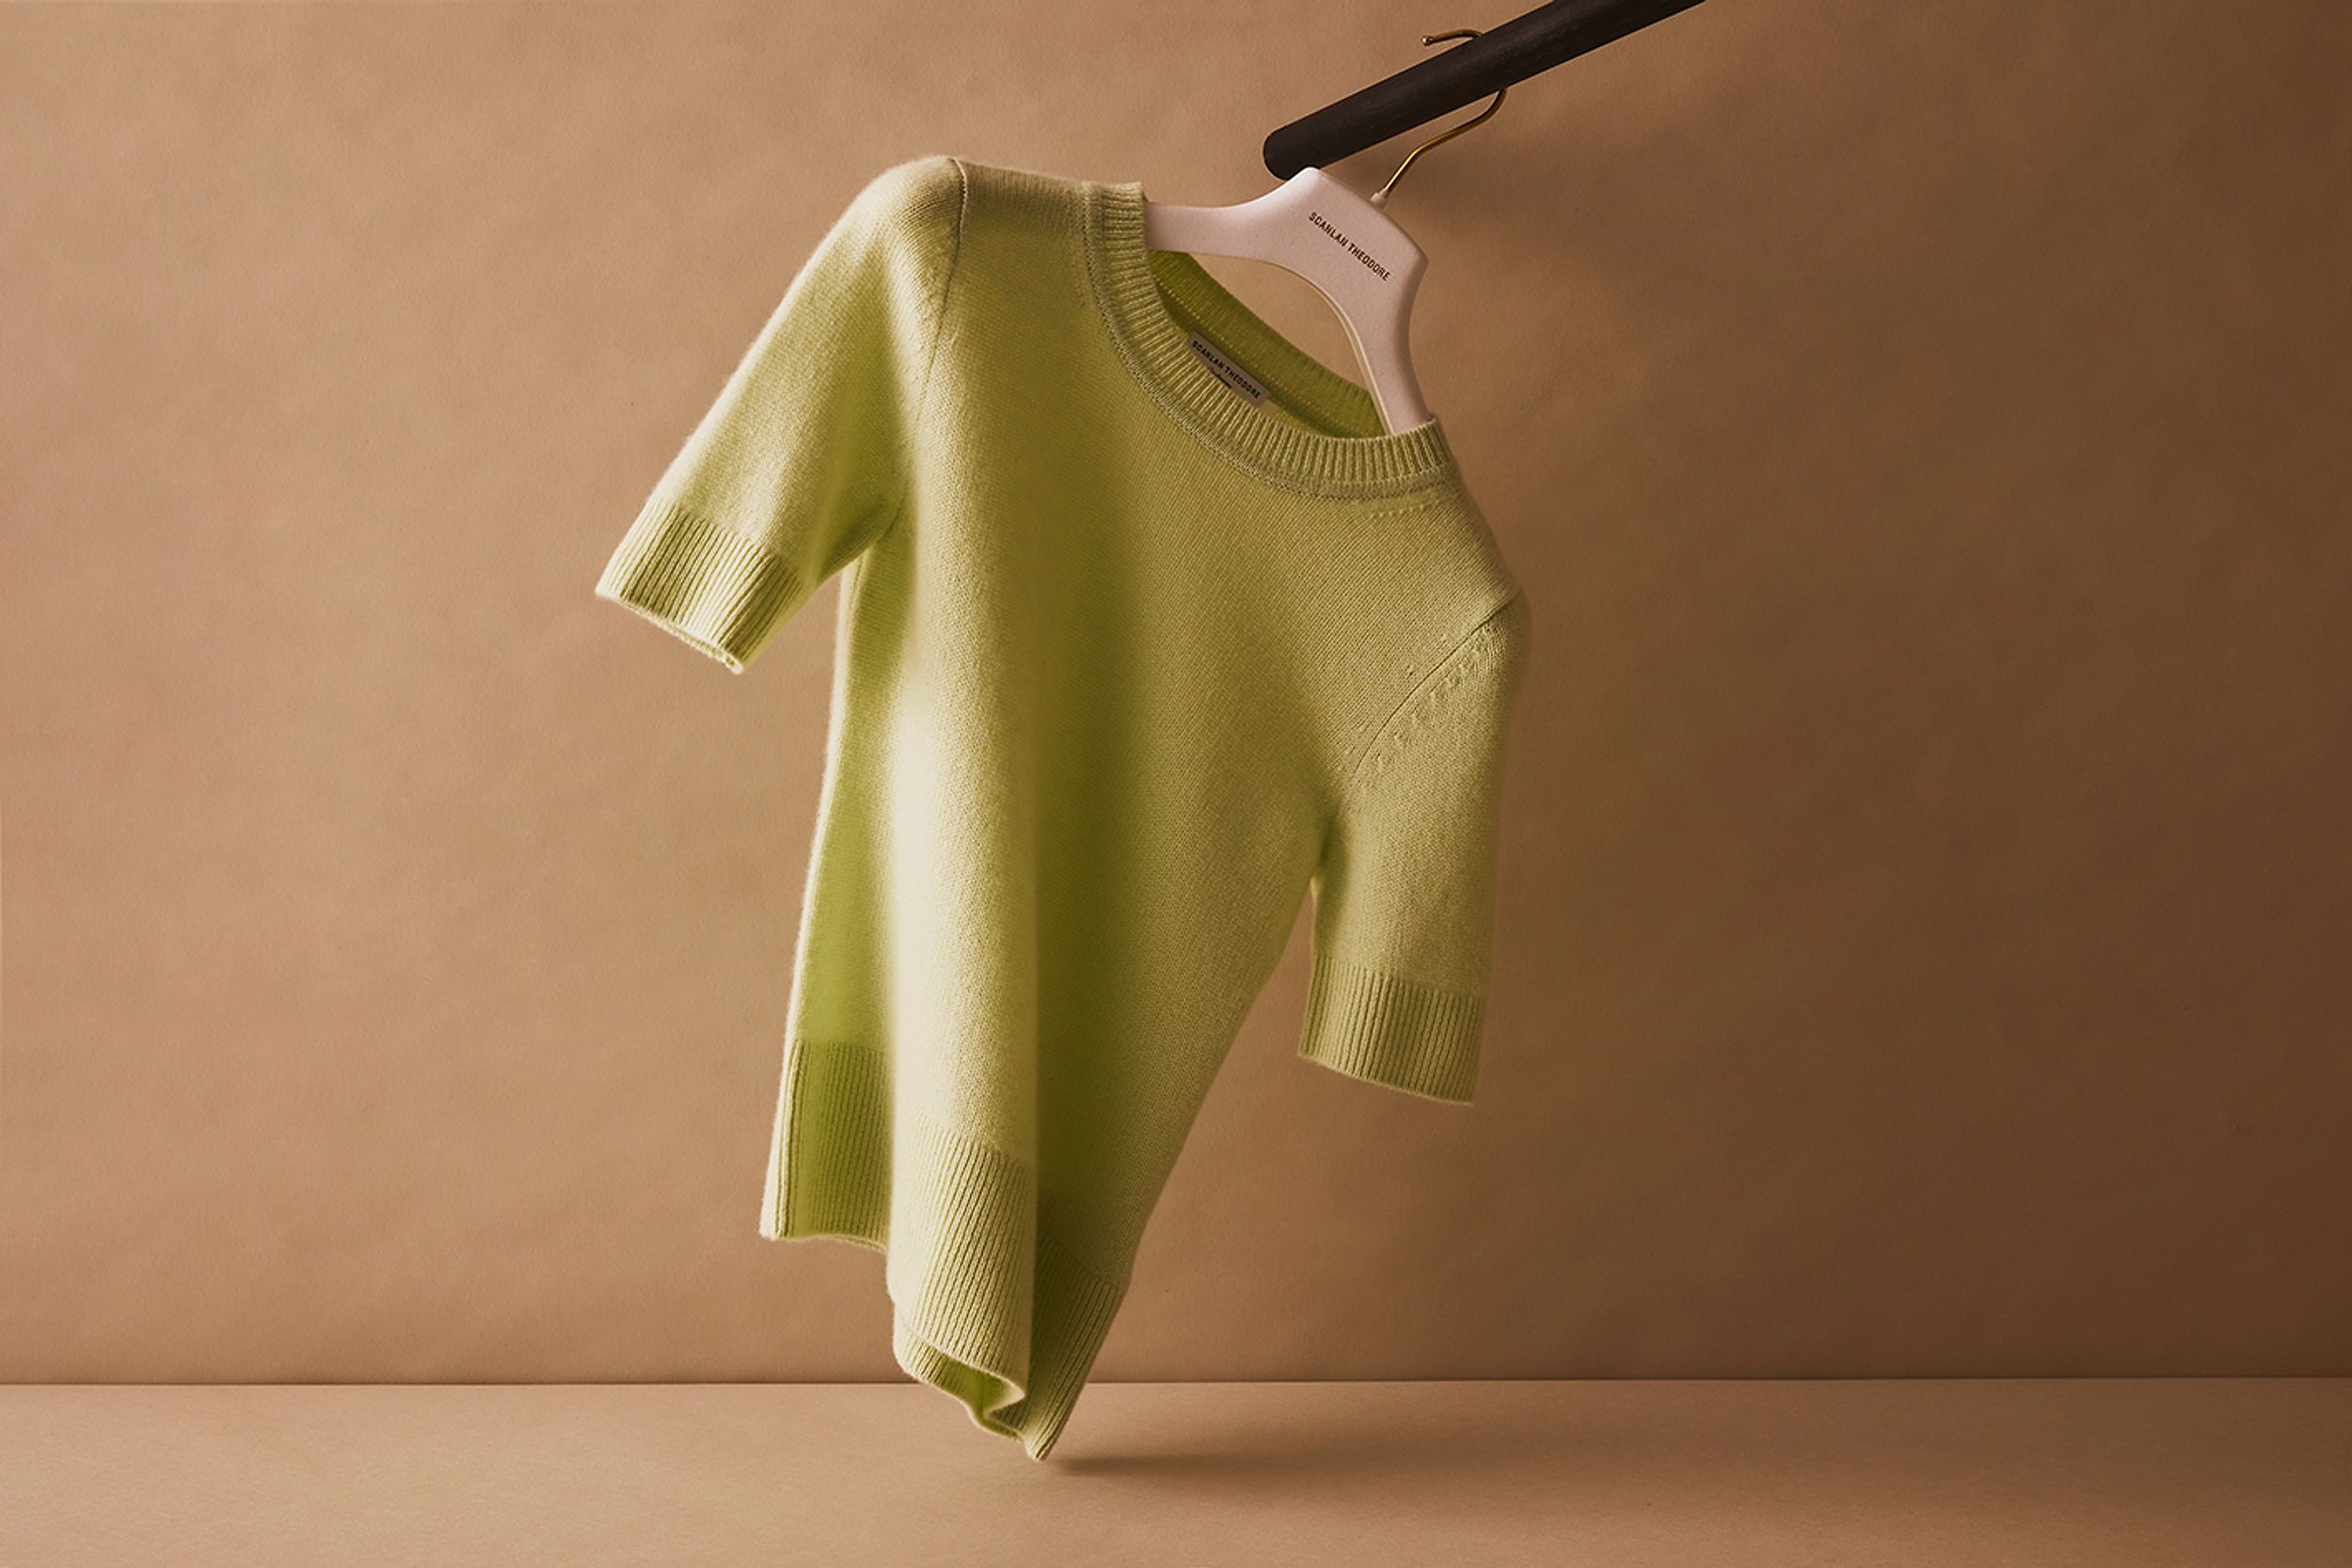 Scanlan Theodore cashmere top with short sleeves hanging on a rail.